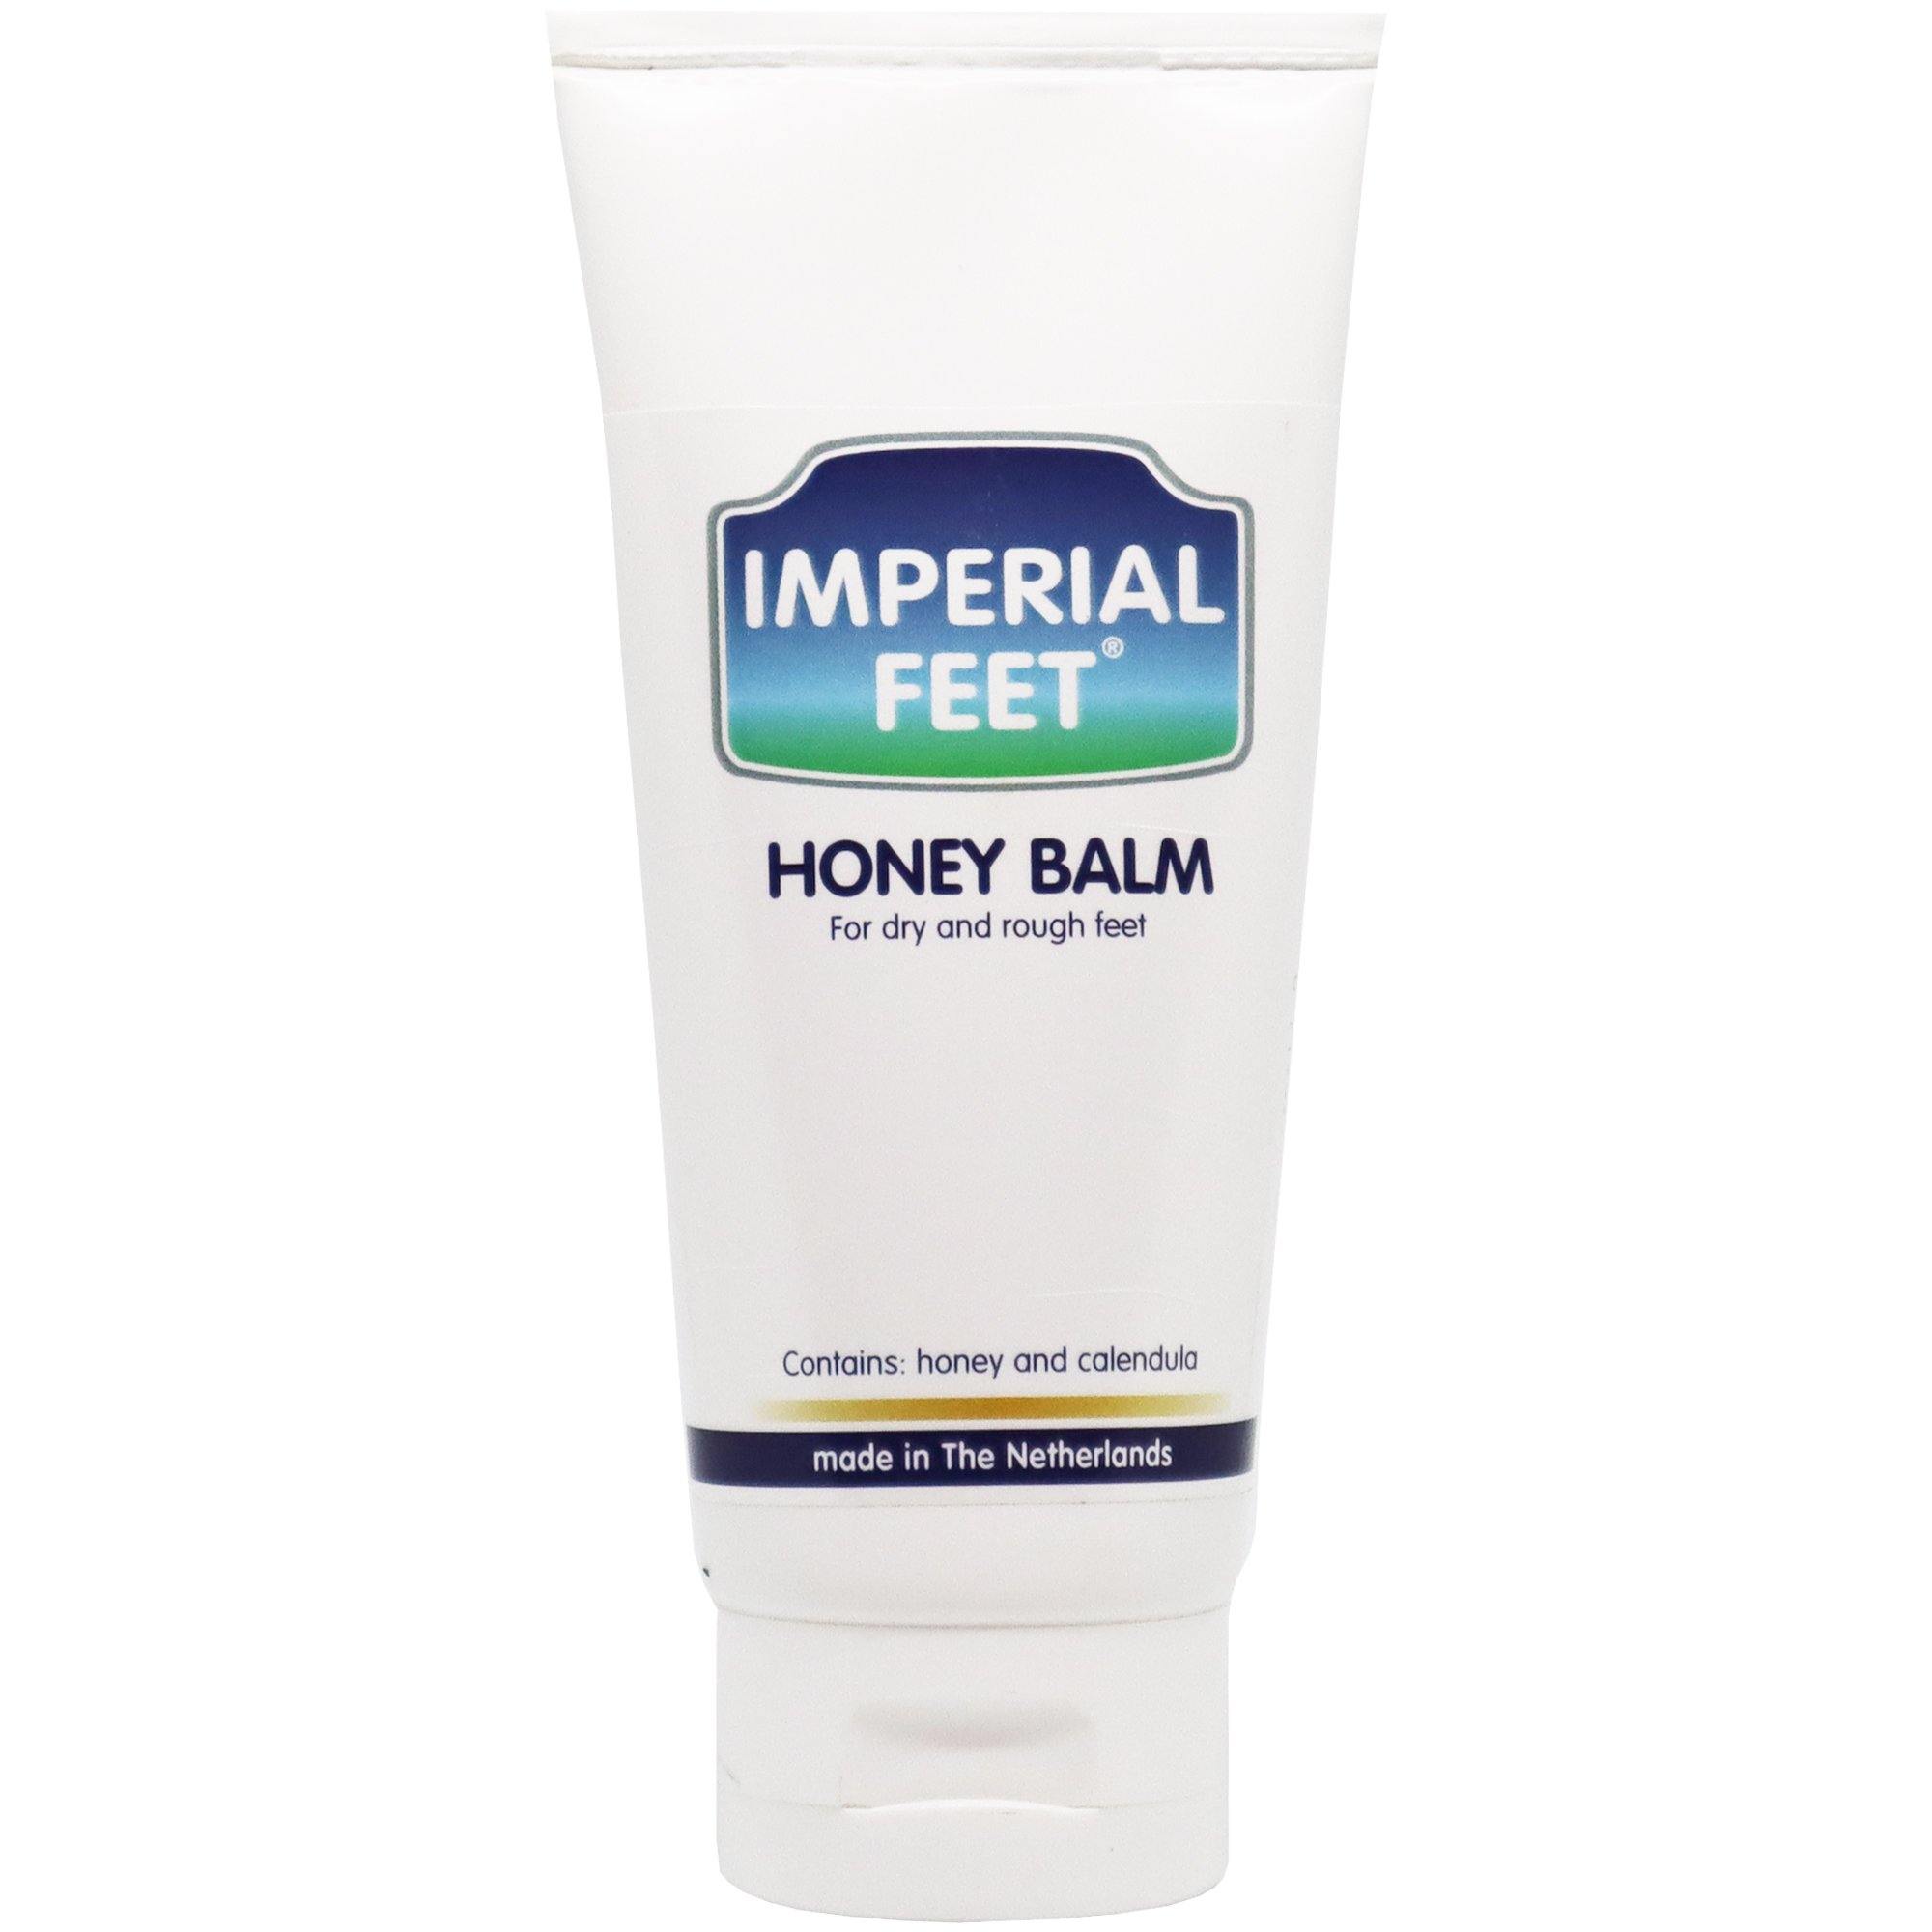 Honey Balm - Imperial Feet - Foot care products - B2C, Dry and Cracked Feet, Extra Care